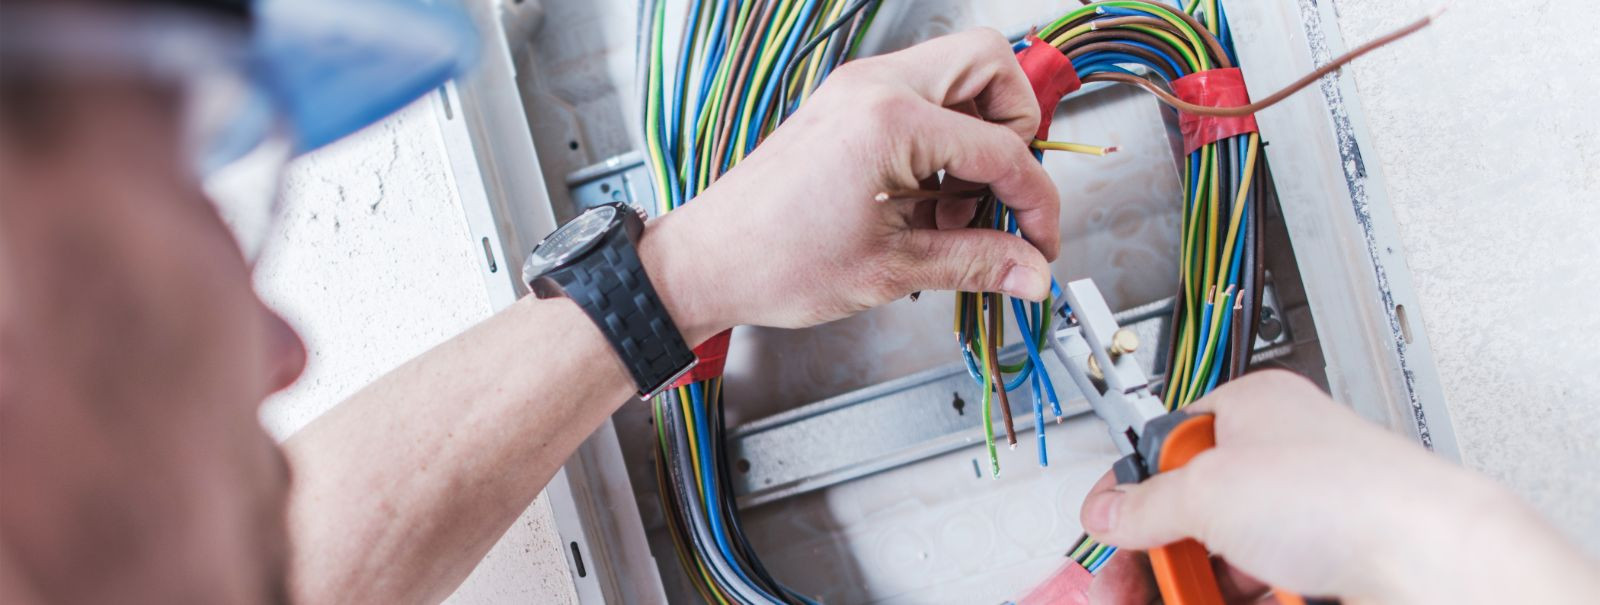 Before embarking on the search for an electrical services provider, it's crucial to have a clear understanding of your project's scope and specific requirements